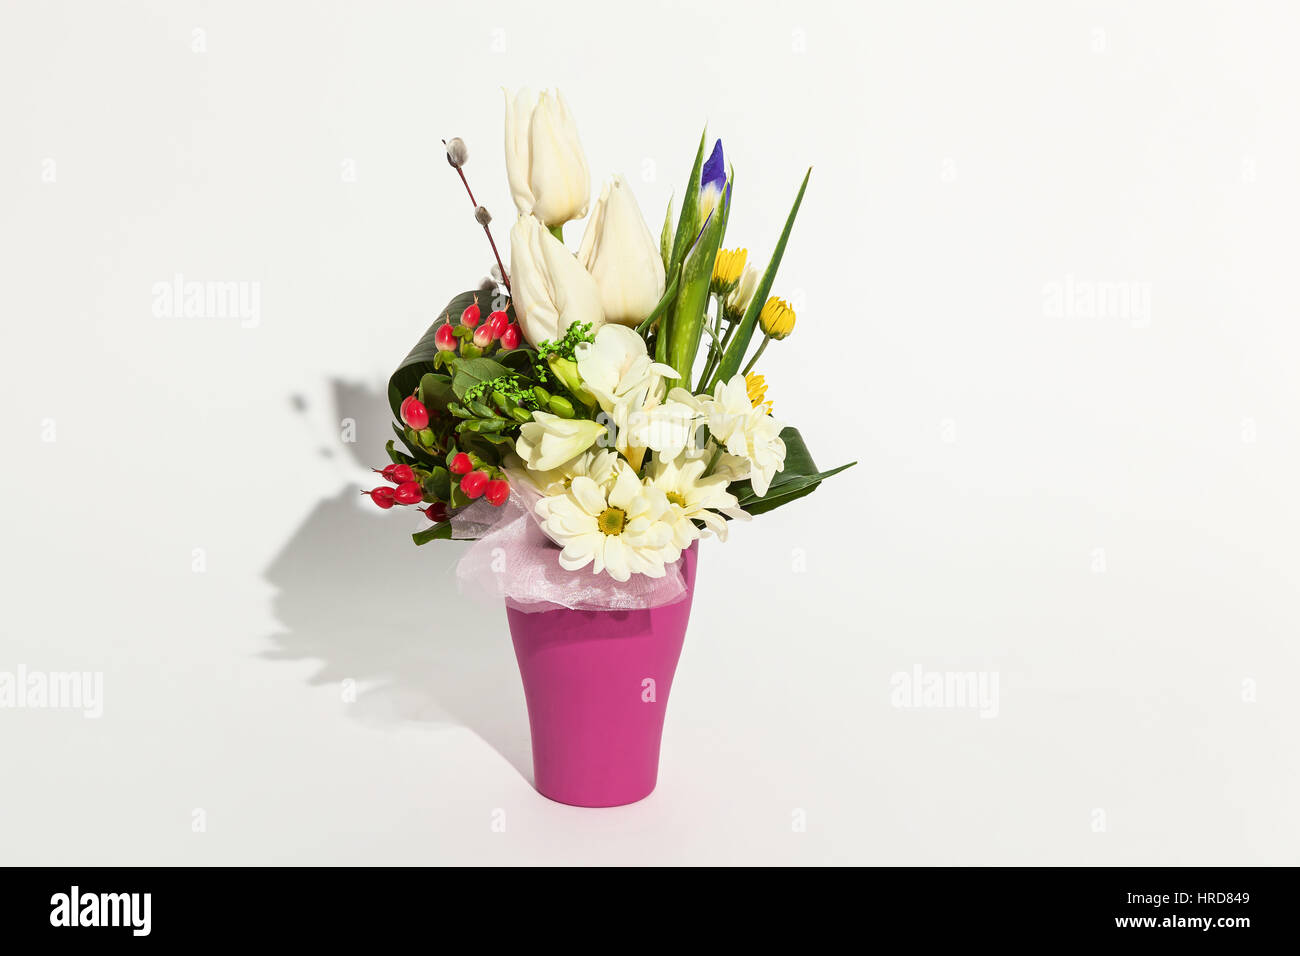 colorful floral bouquet of tulips,chrysanthemums, red hypericums and irises  in vase isolated on white background Stock Photo